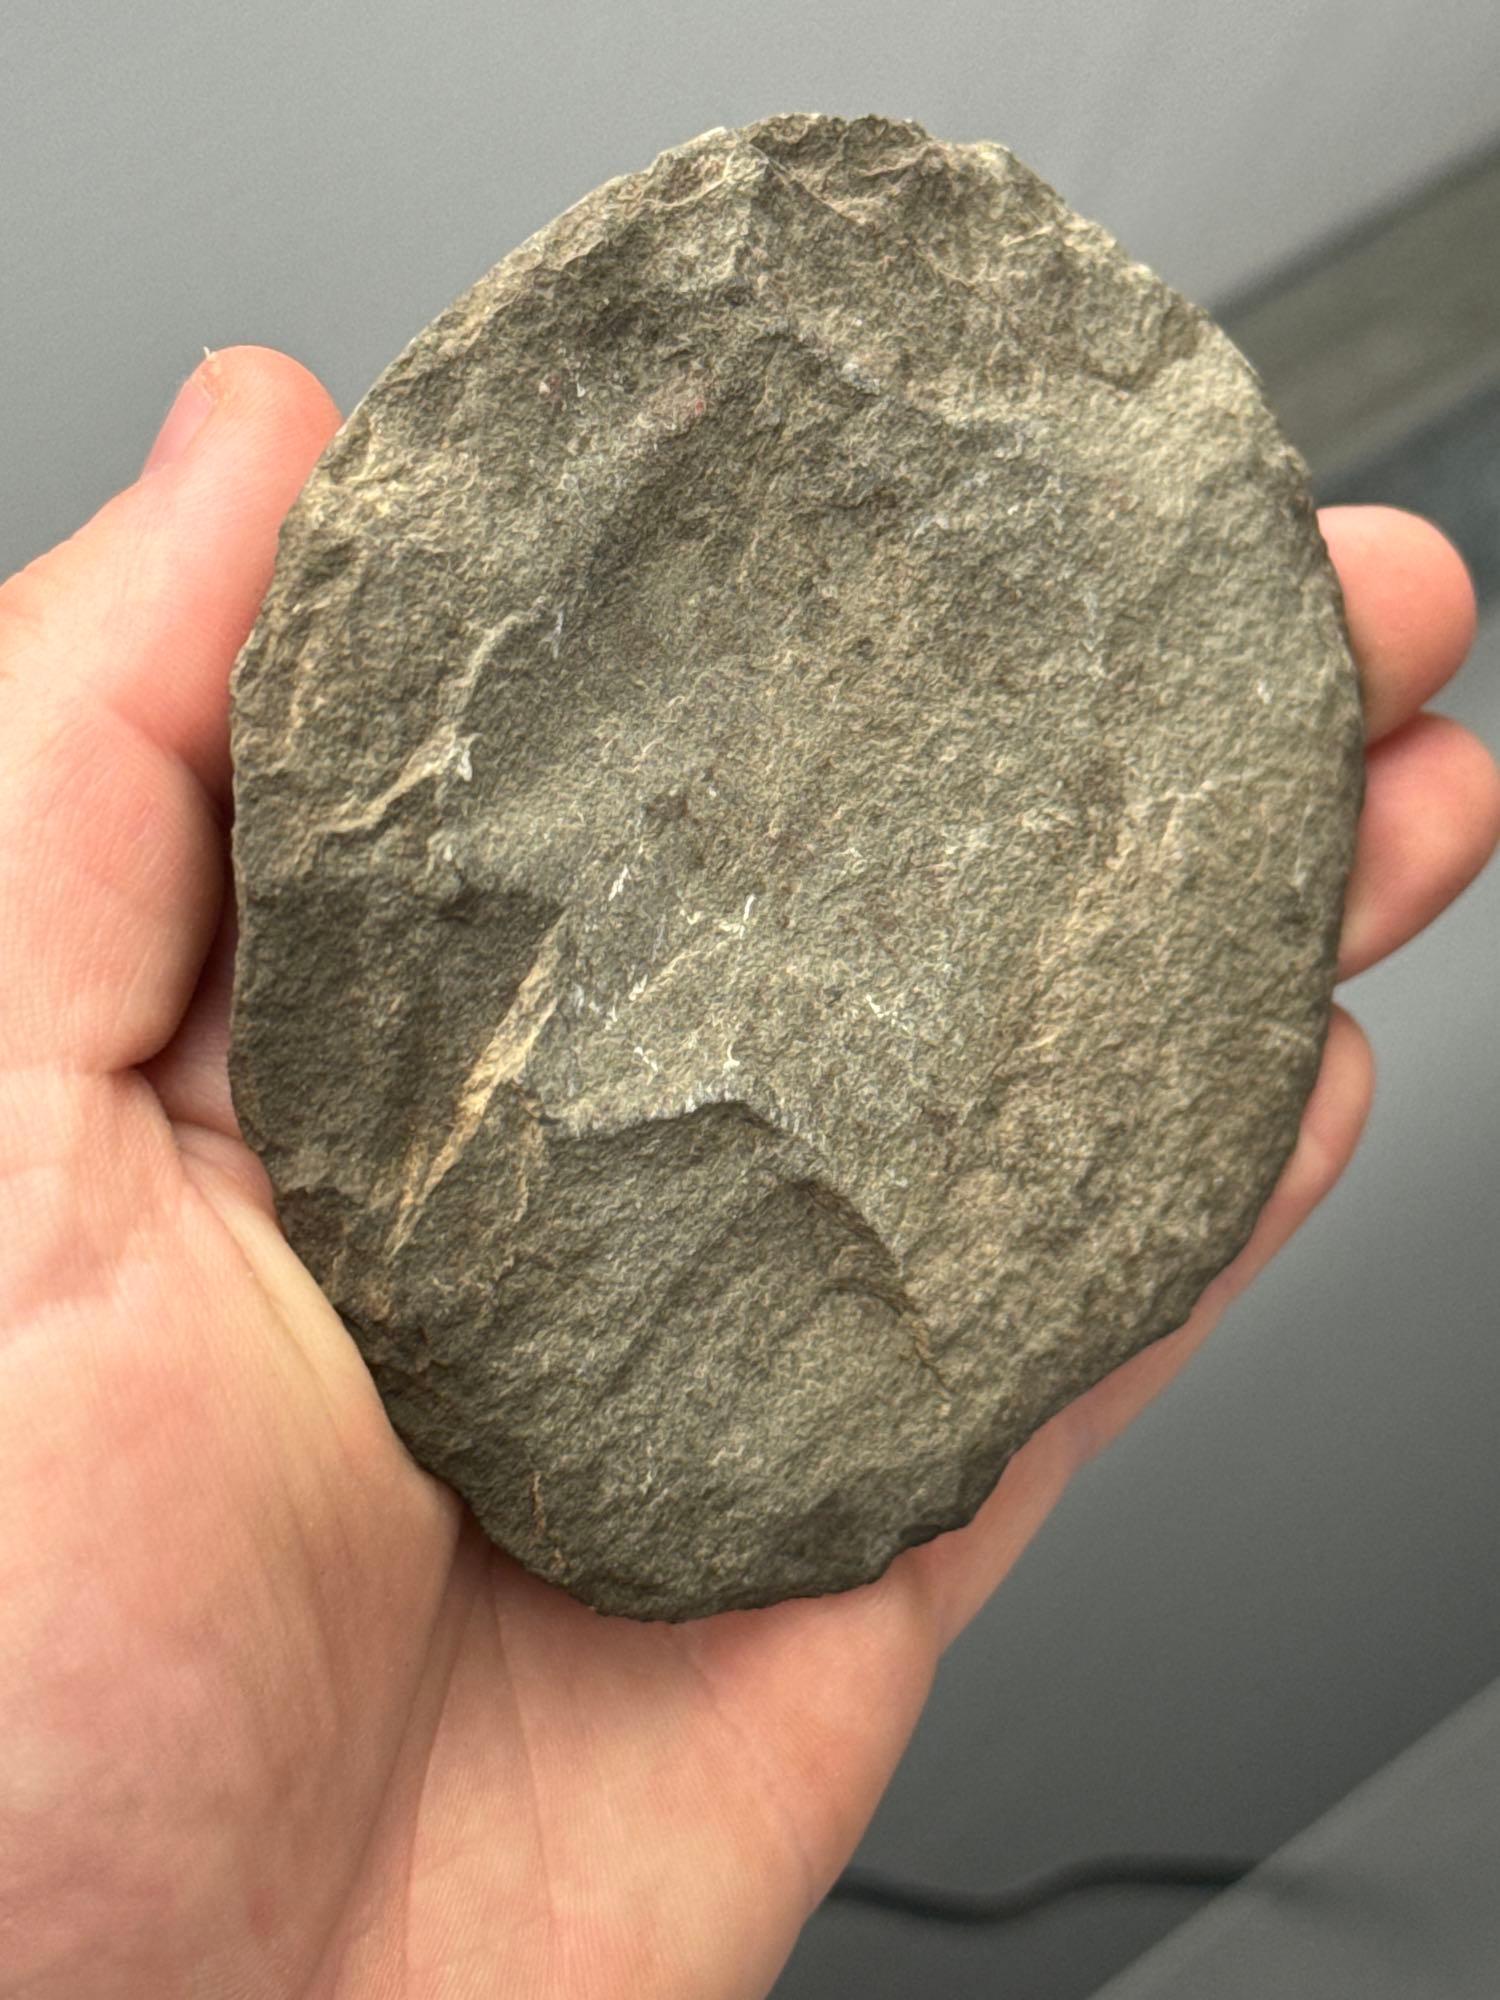 4 1/16" Chipped "Pot Lid" Stone, Found in New Jersey